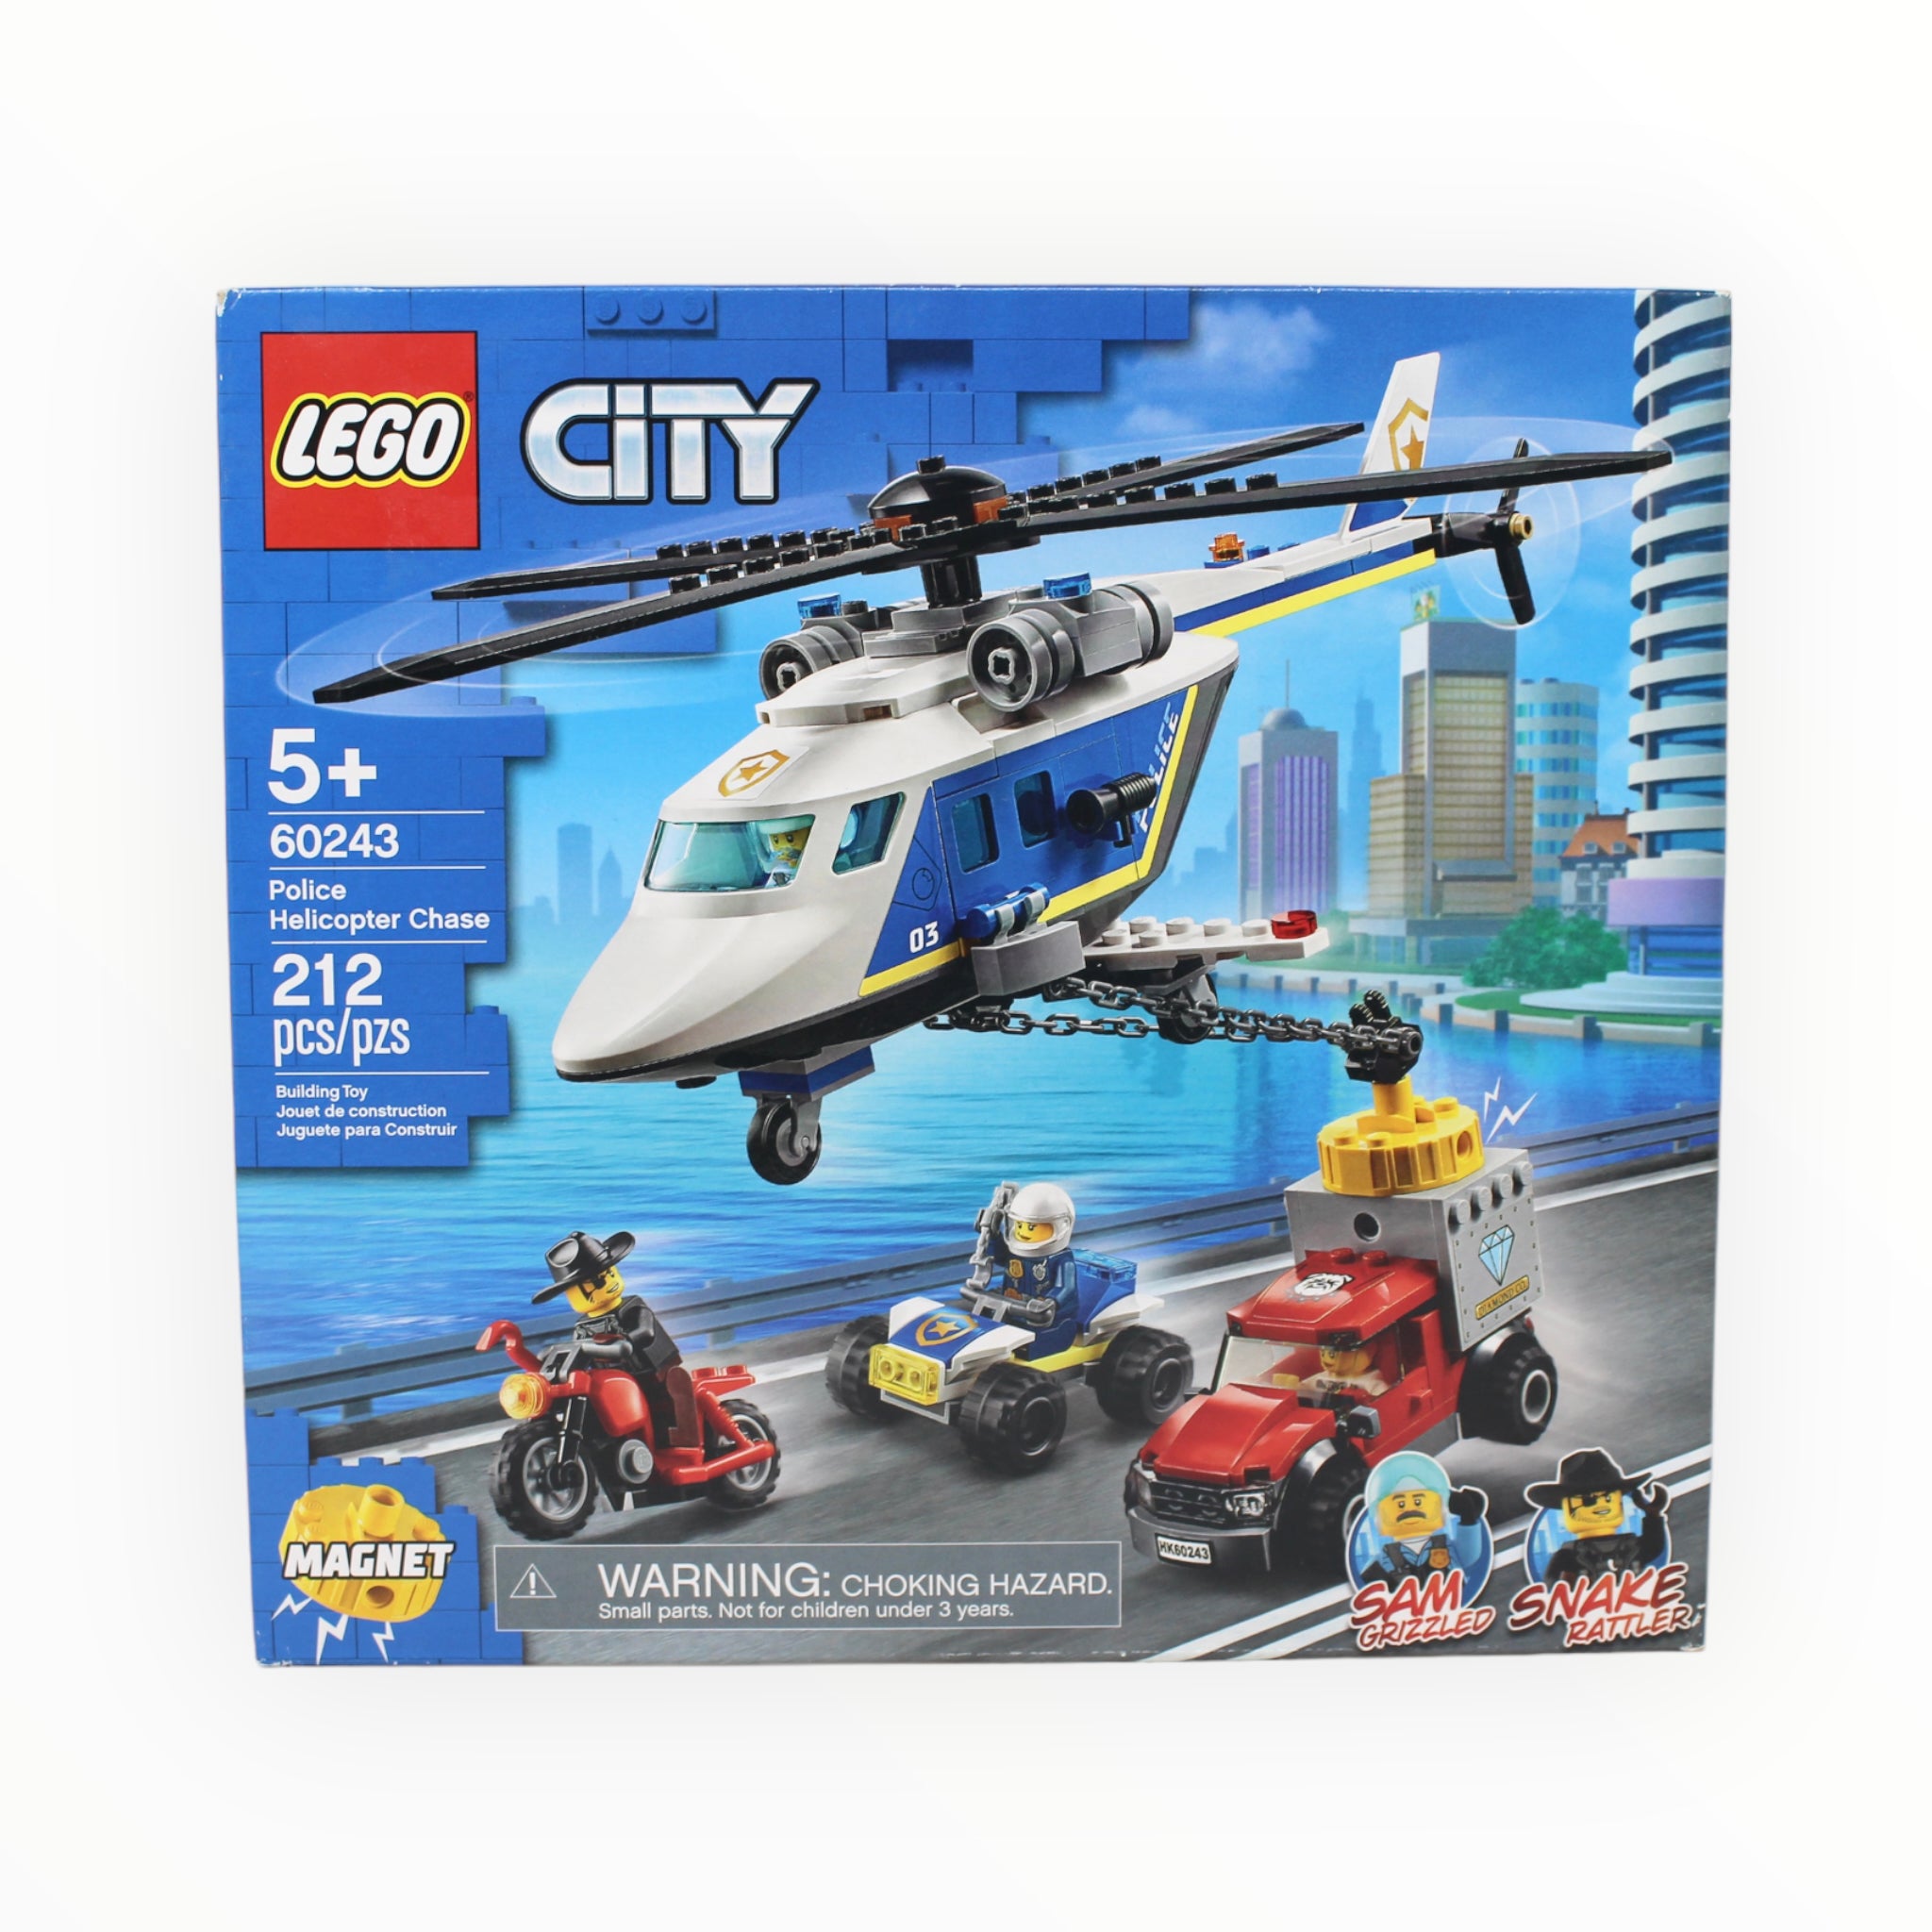 Retired Set 60243 City Police Helicopter Chase